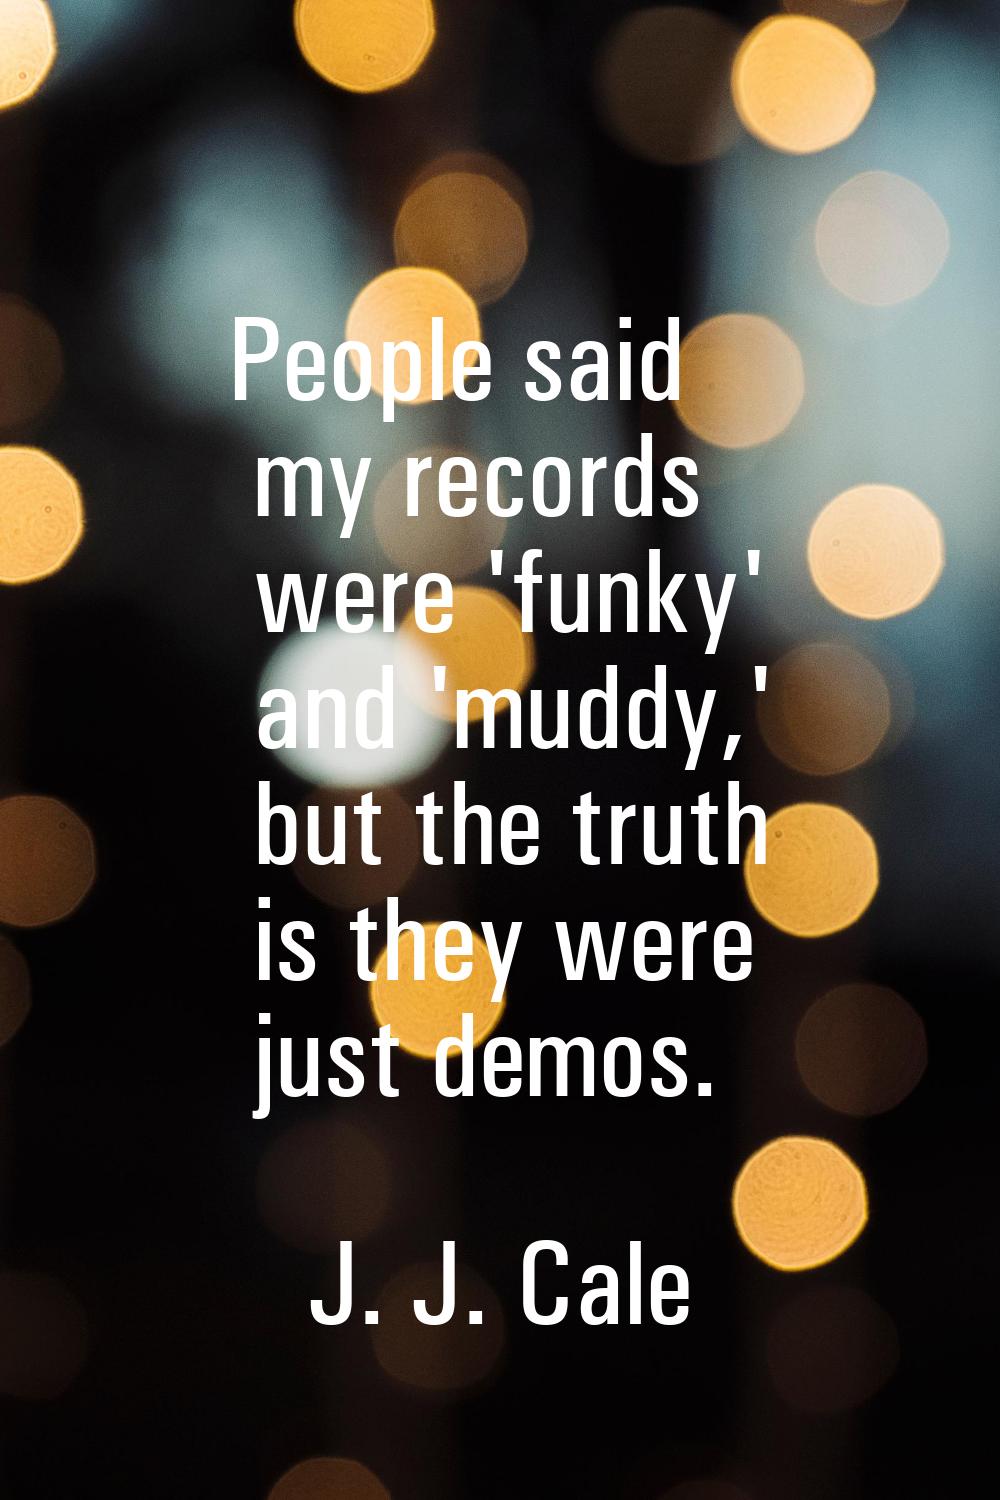 People said my records were 'funky' and 'muddy,' but the truth is they were just demos.